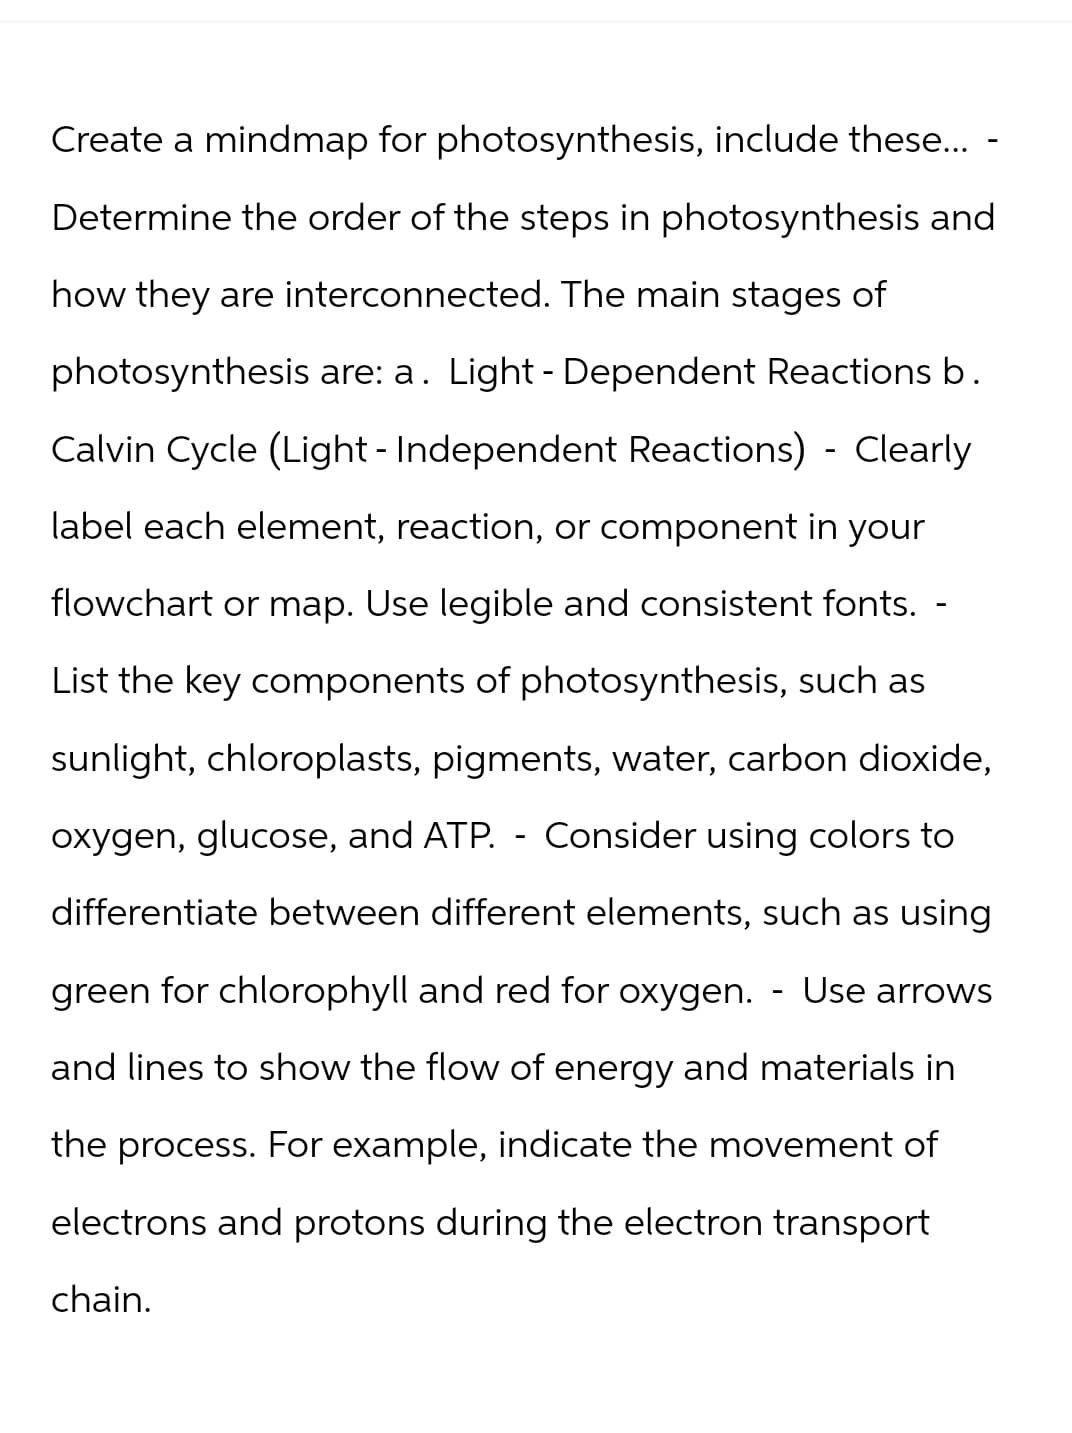 Create a mindmap for photosynthesis, include these... -
Determine the order of the steps in photosynthesis and
how they are interconnected. The main stages of
photosynthesis are: a. Light - Dependent Reactions b.
Calvin Cycle (Light - Independent Reactions) - Clearly
label each element, reaction, or component in your
flowchart or map. Use legible and consistent fonts.
List the key components of photosynthesis, such as
sunlight, chloroplasts, pigments, water, carbon dioxide,
oxygen, glucose, and ATP. - Consider using colors to
differentiate between different elements, such as using
green for chlorophyll and red for oxygen.
-
Use arrows
and lines to show the flow of energy and materials in
the process. For example, indicate the movement of
electrons and protons during the electron transport
chain.